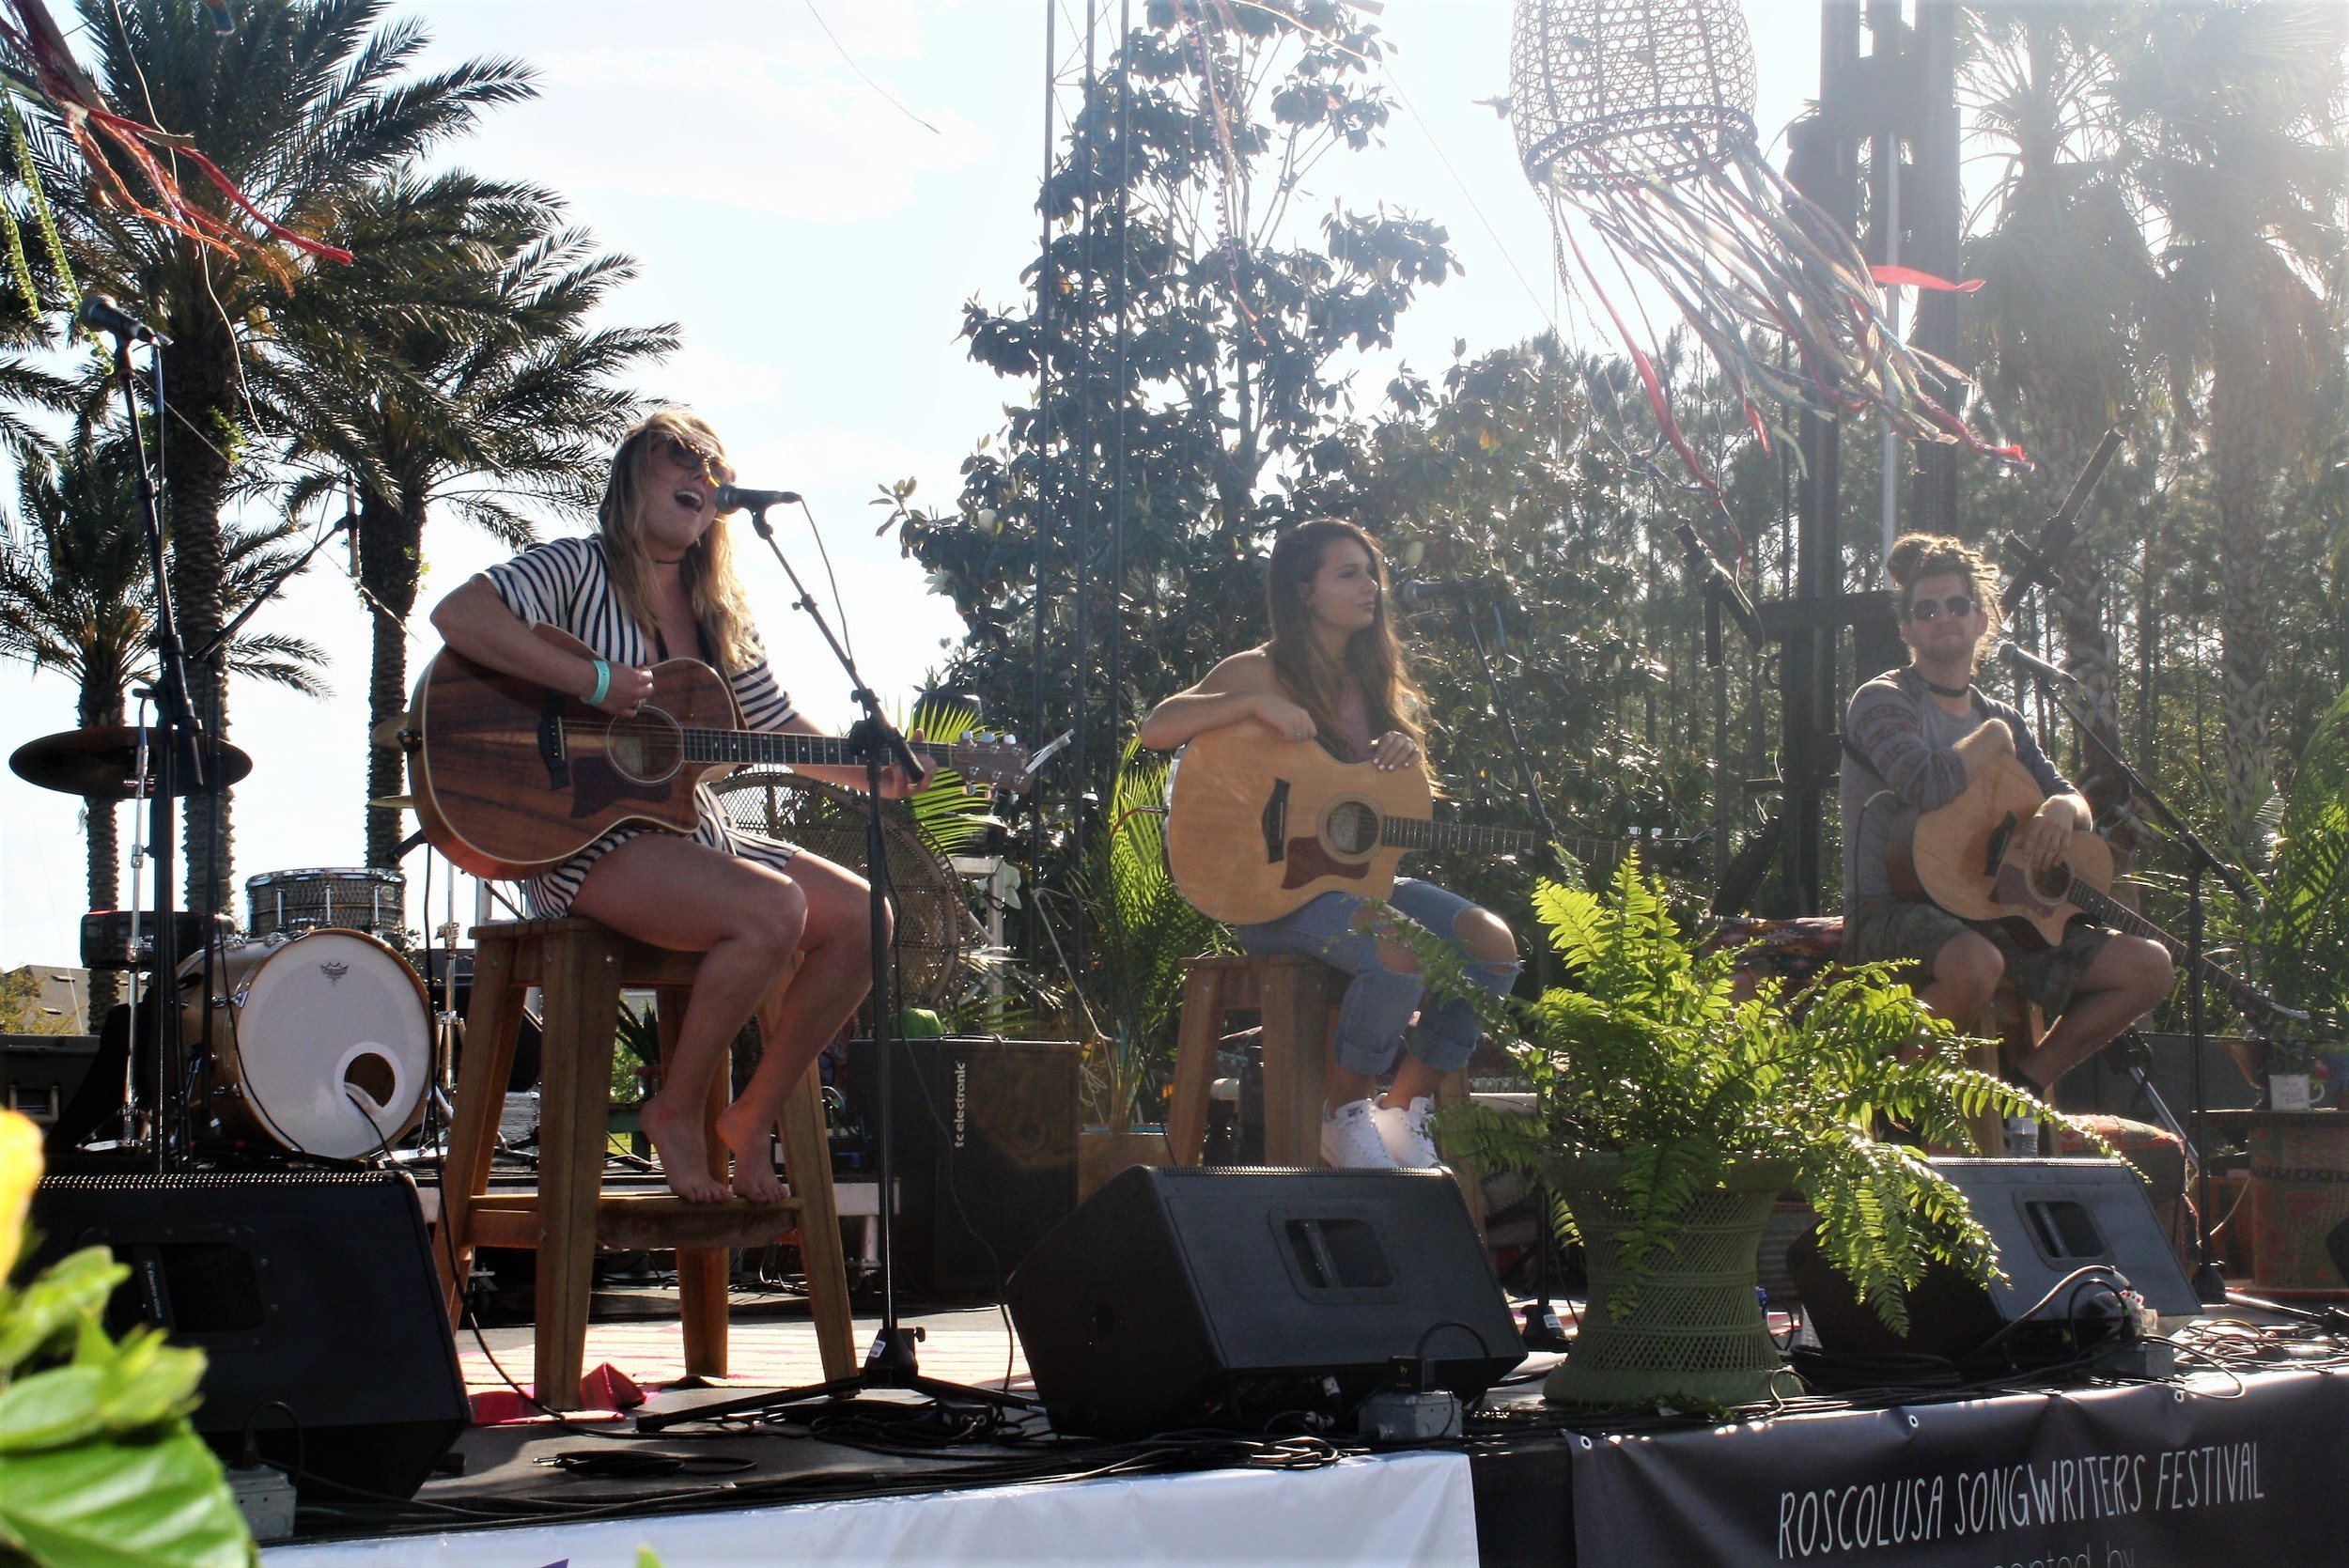 Casey Weston, Kaylee Rose and Tylor Bailey perform at the 6th Annual Roscolusa Songwriters Festival, held April 22 in Nocatee.